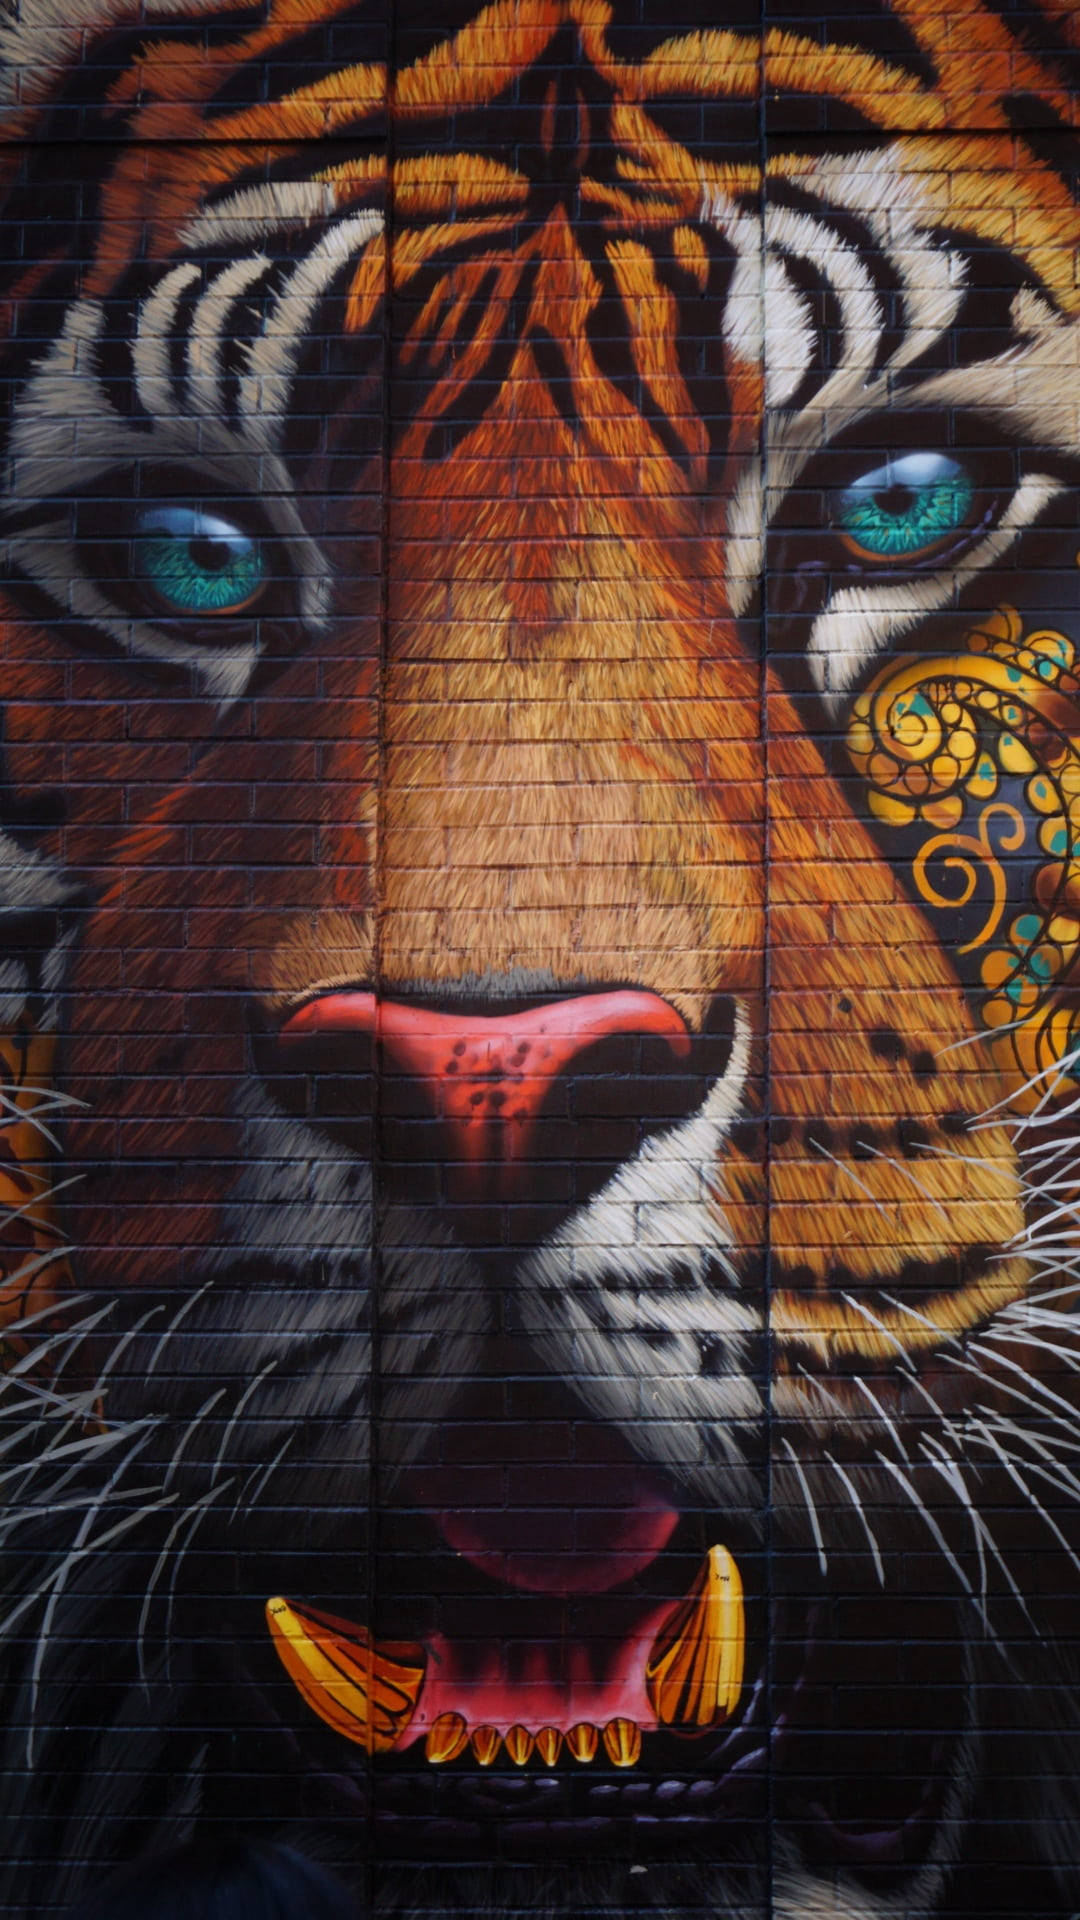 Tiger Face Wall Graffiti Iphone Background